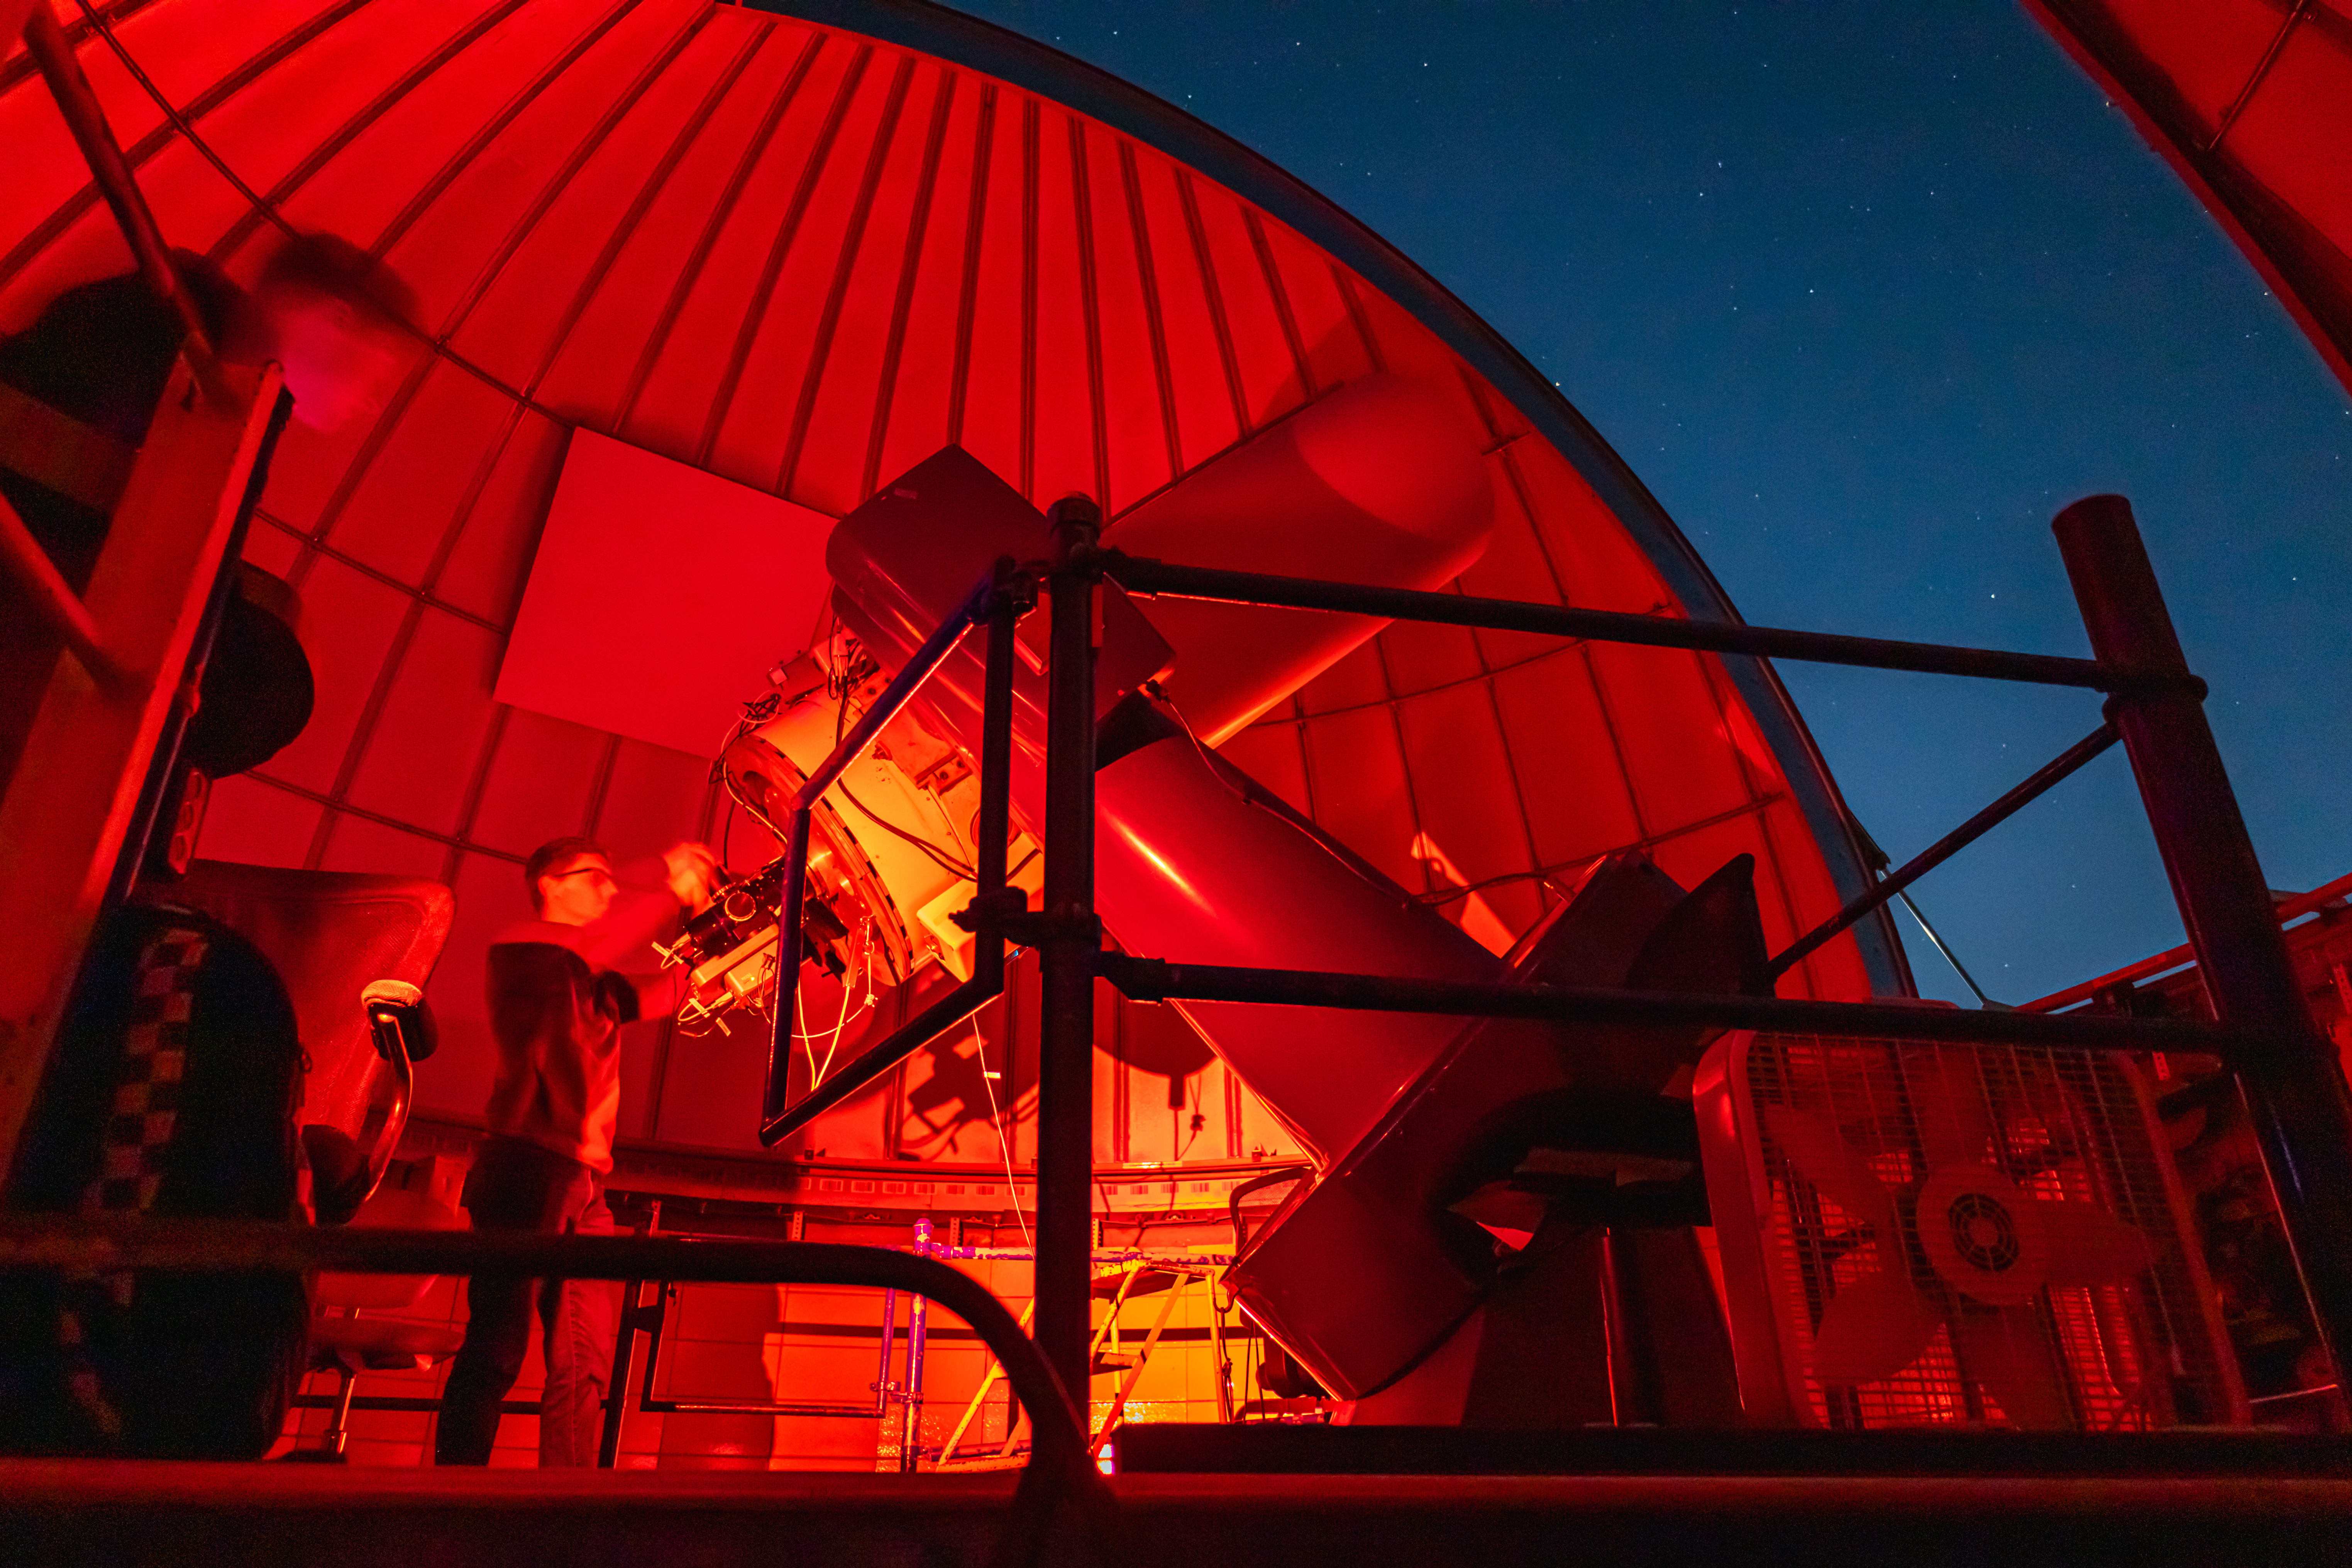 Inside the 24 inch dome lit with red light with the dome slit open to a dark blue sky with telescope operators. Photo by Brian Finch.